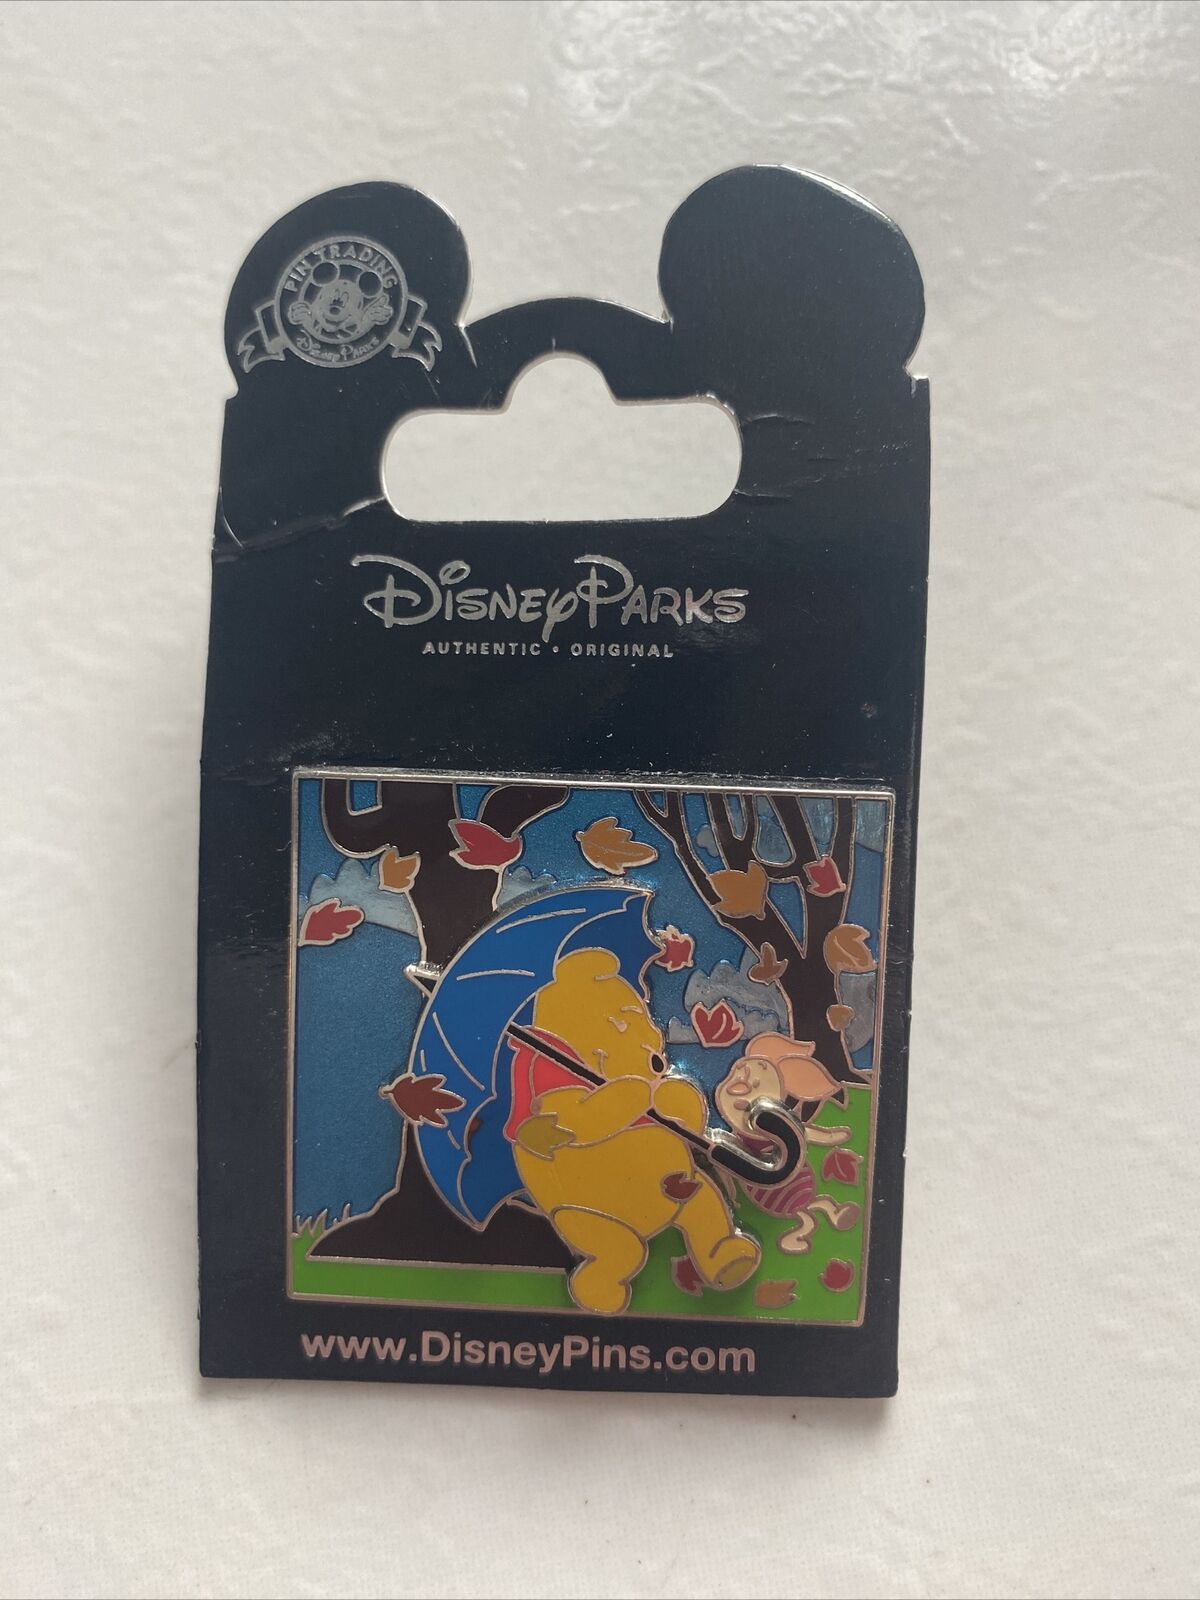 Winnie the Pooh - A Blustery Day - Disney Parks Authentic Original Pin Must Have